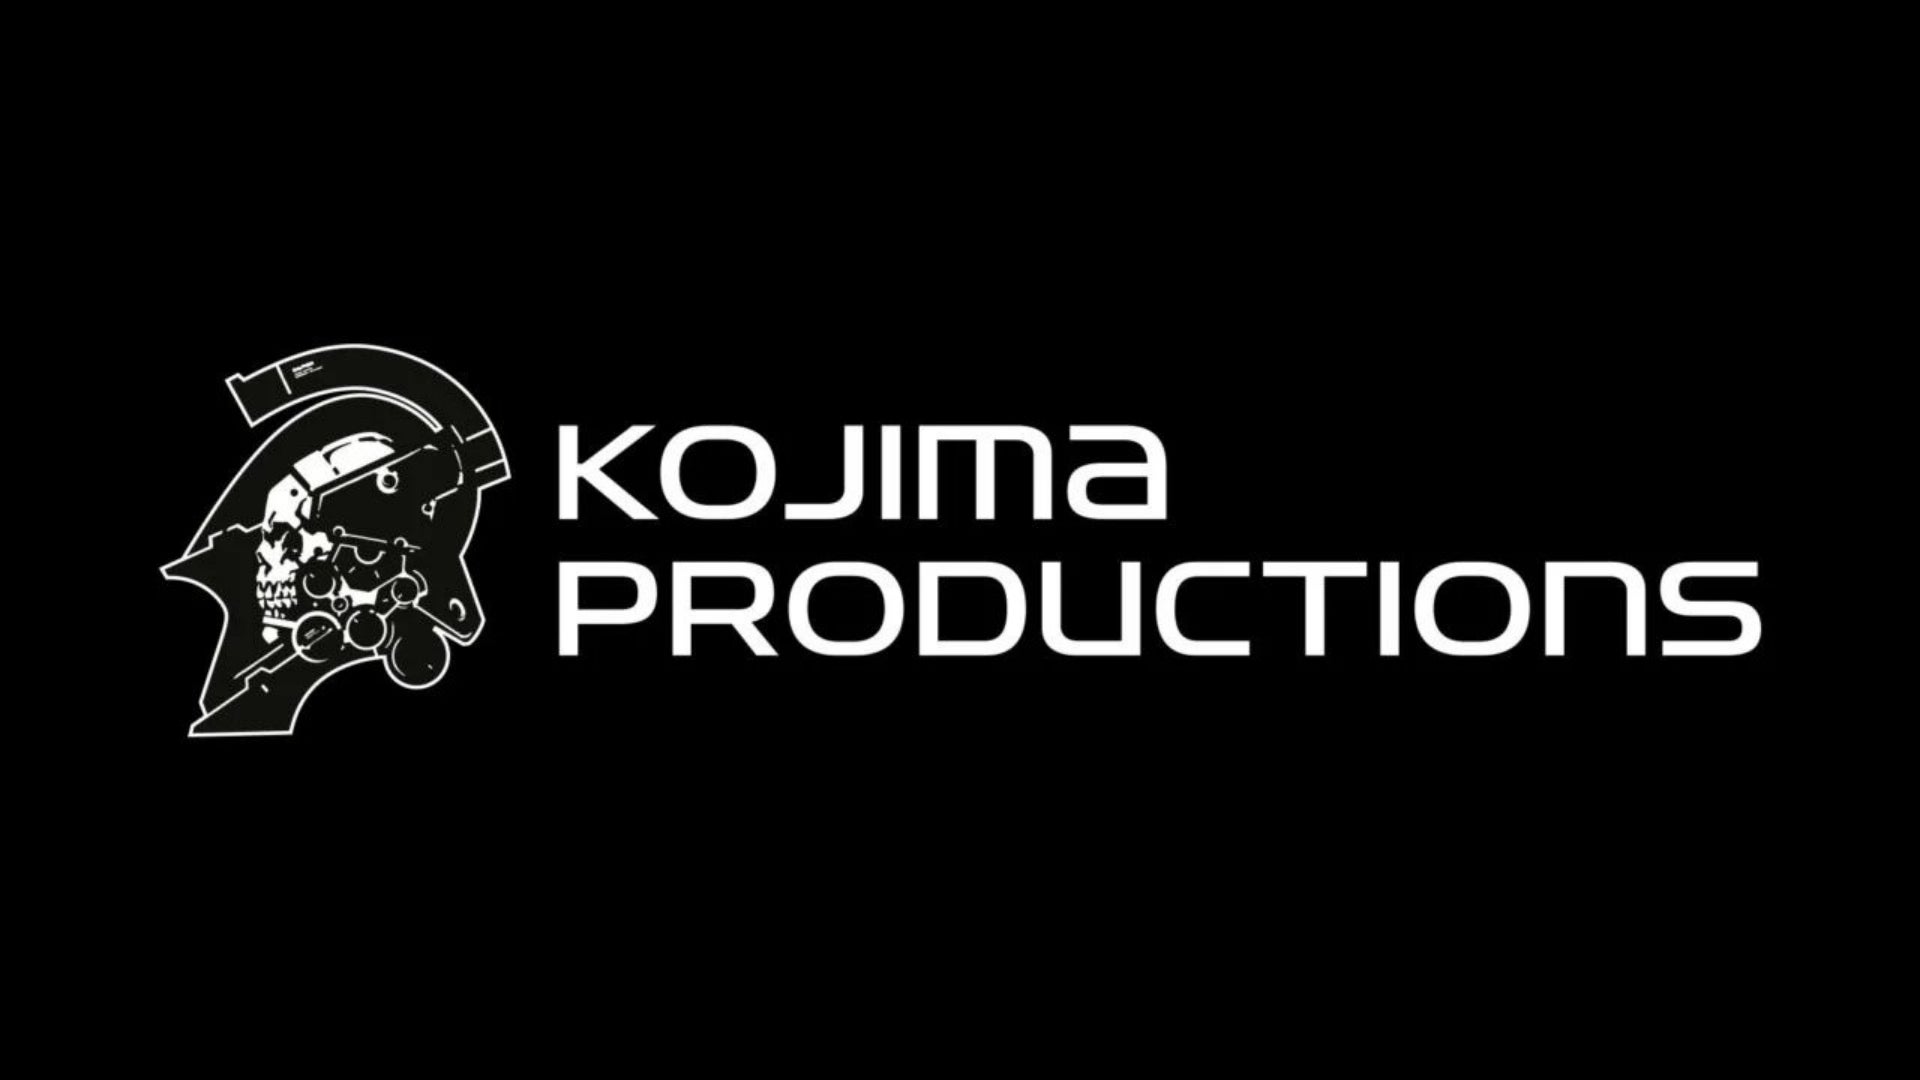 Kojima Productions maintain a relationship with PlayStation after Xbox partnership announcement.